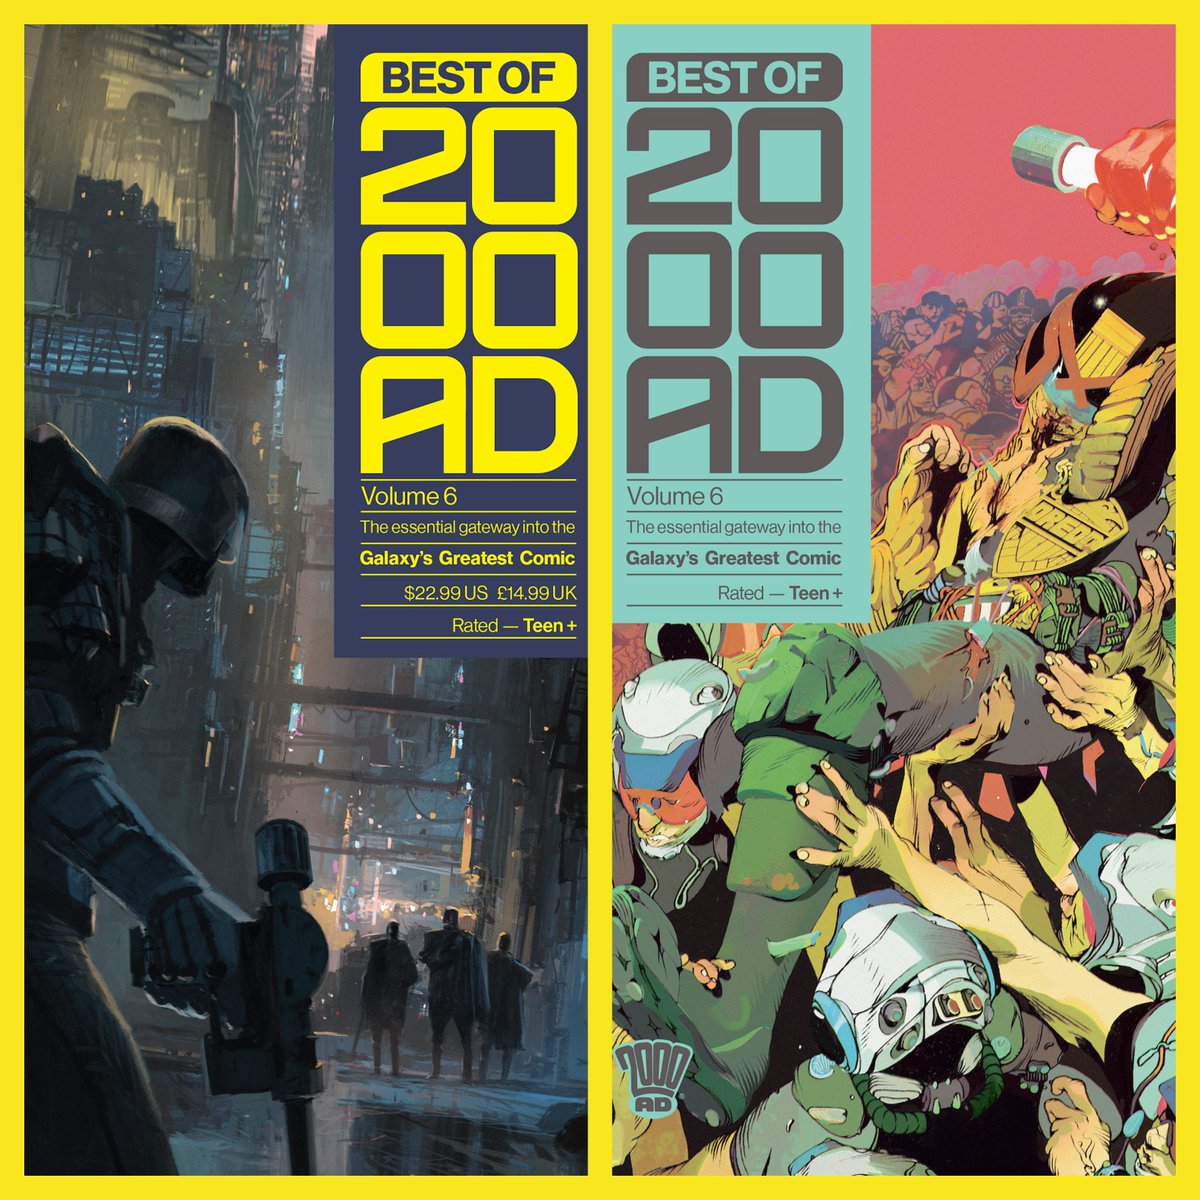 EXCLUSIVE First Look: ‘Best of 2000 AD’ Vol. 6 cover reveals @2000AD #comics #JudgeDredd By creators @an_anandrk, @ianmcque, and @hellomuller, get the scoop here: aiptcomics.com/2024/01/09/exc…